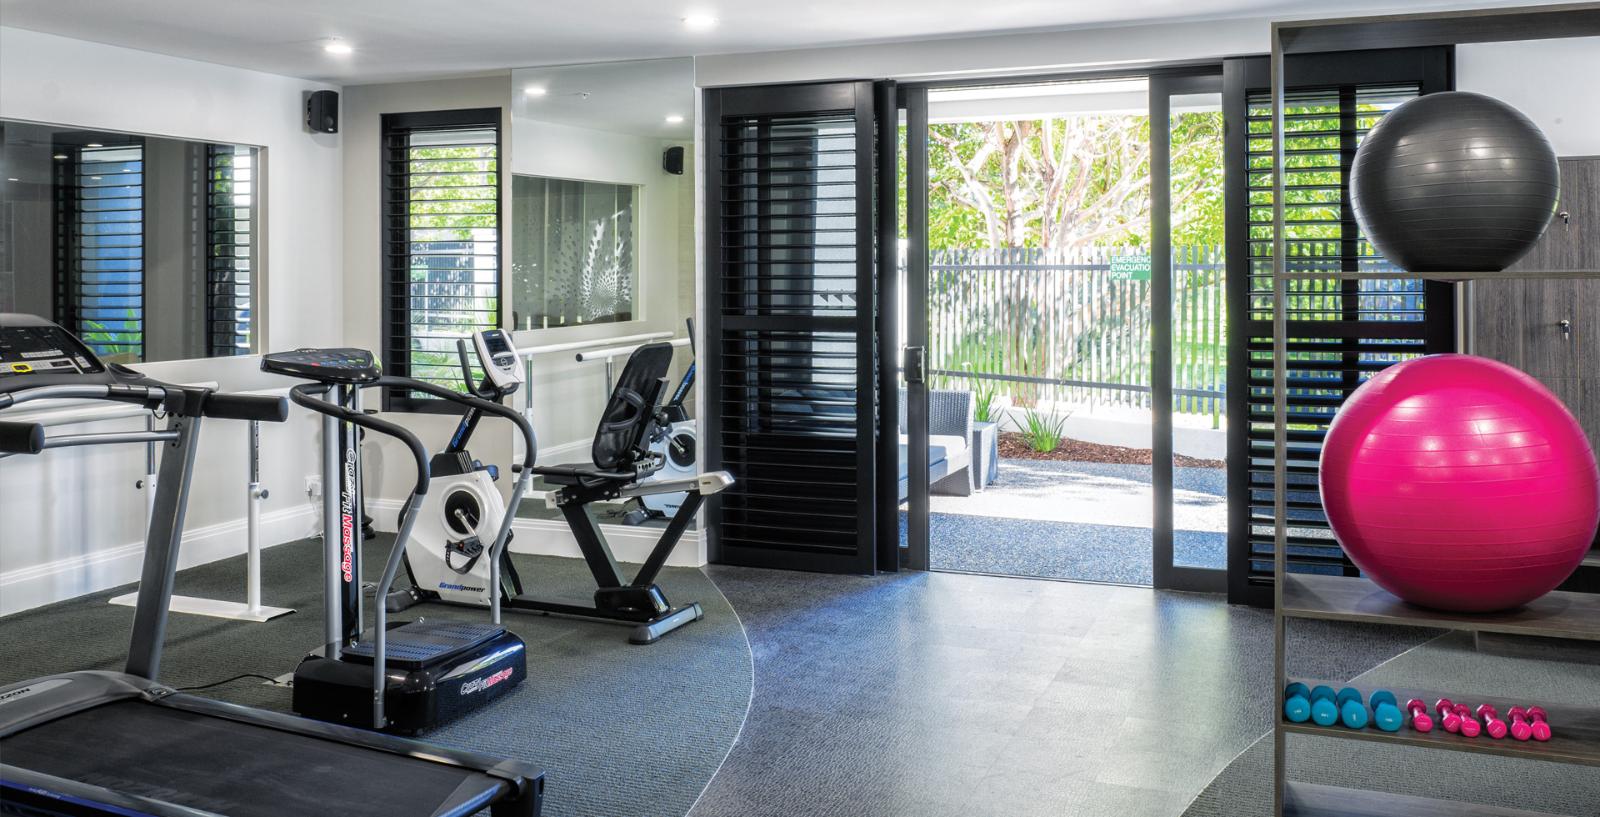 Arcare aged care parkview malvern east gym 02